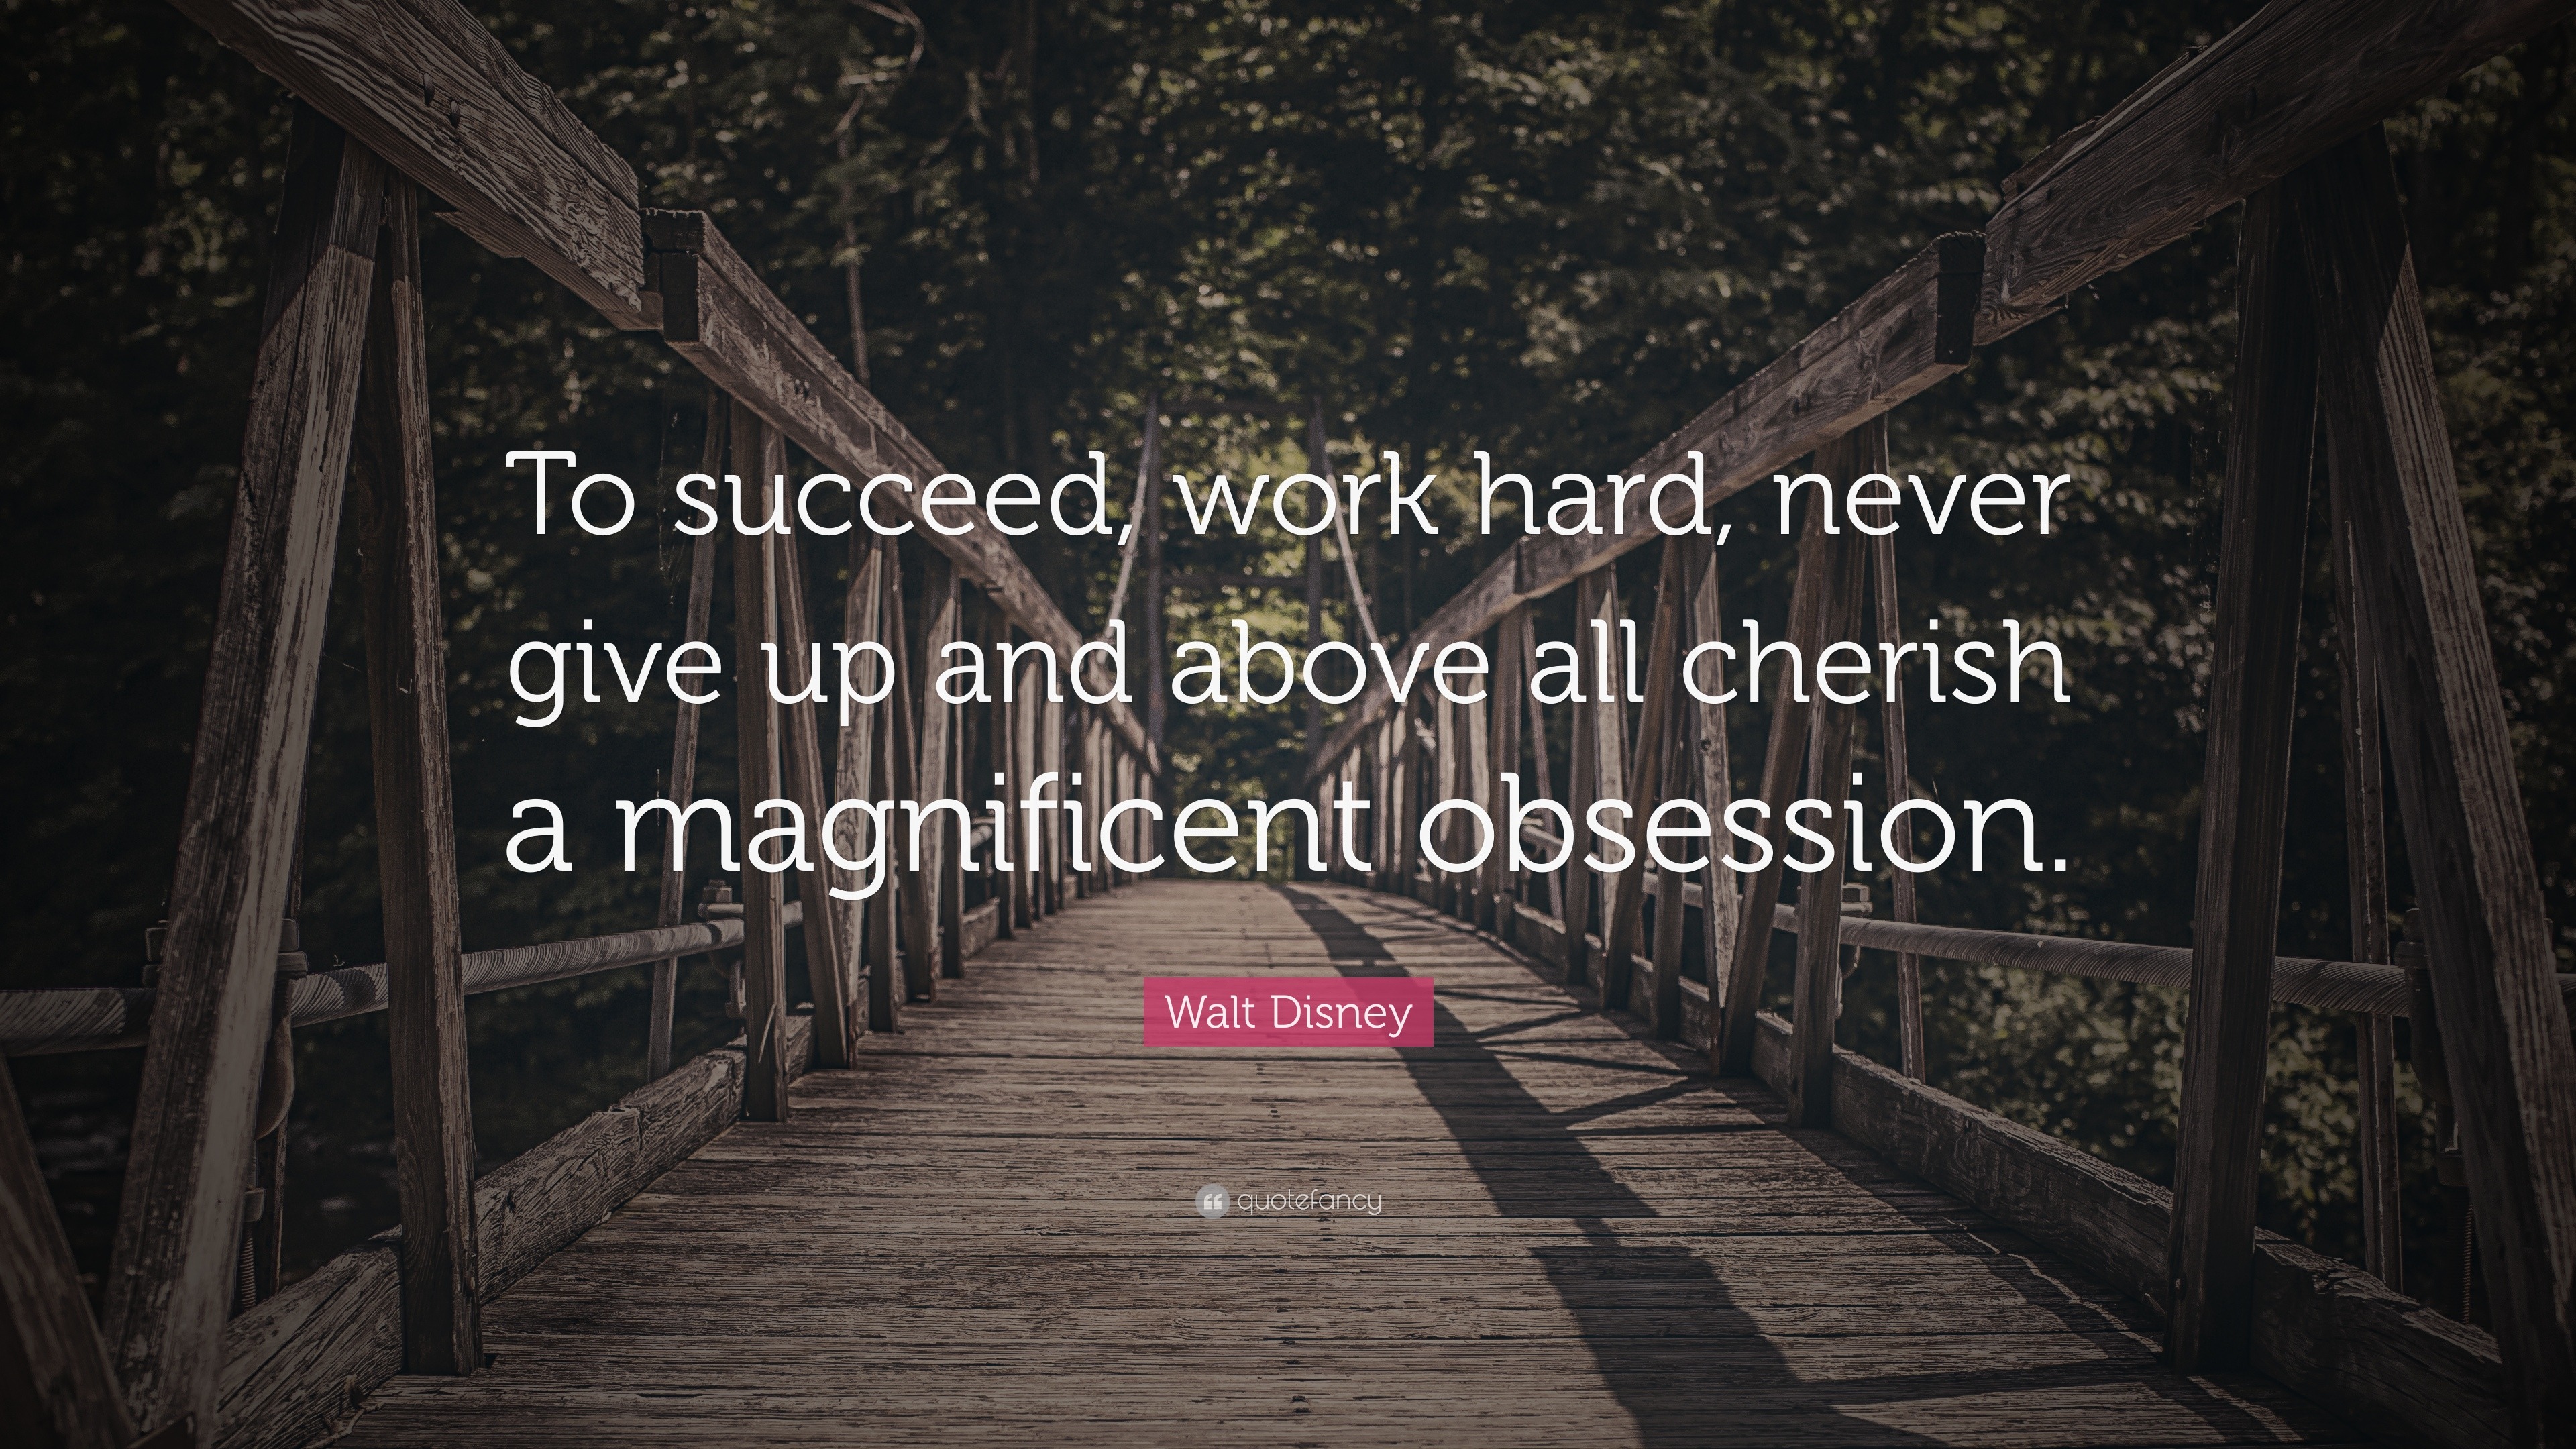 Walt Disney Quote “To succeed work hard never give up and above